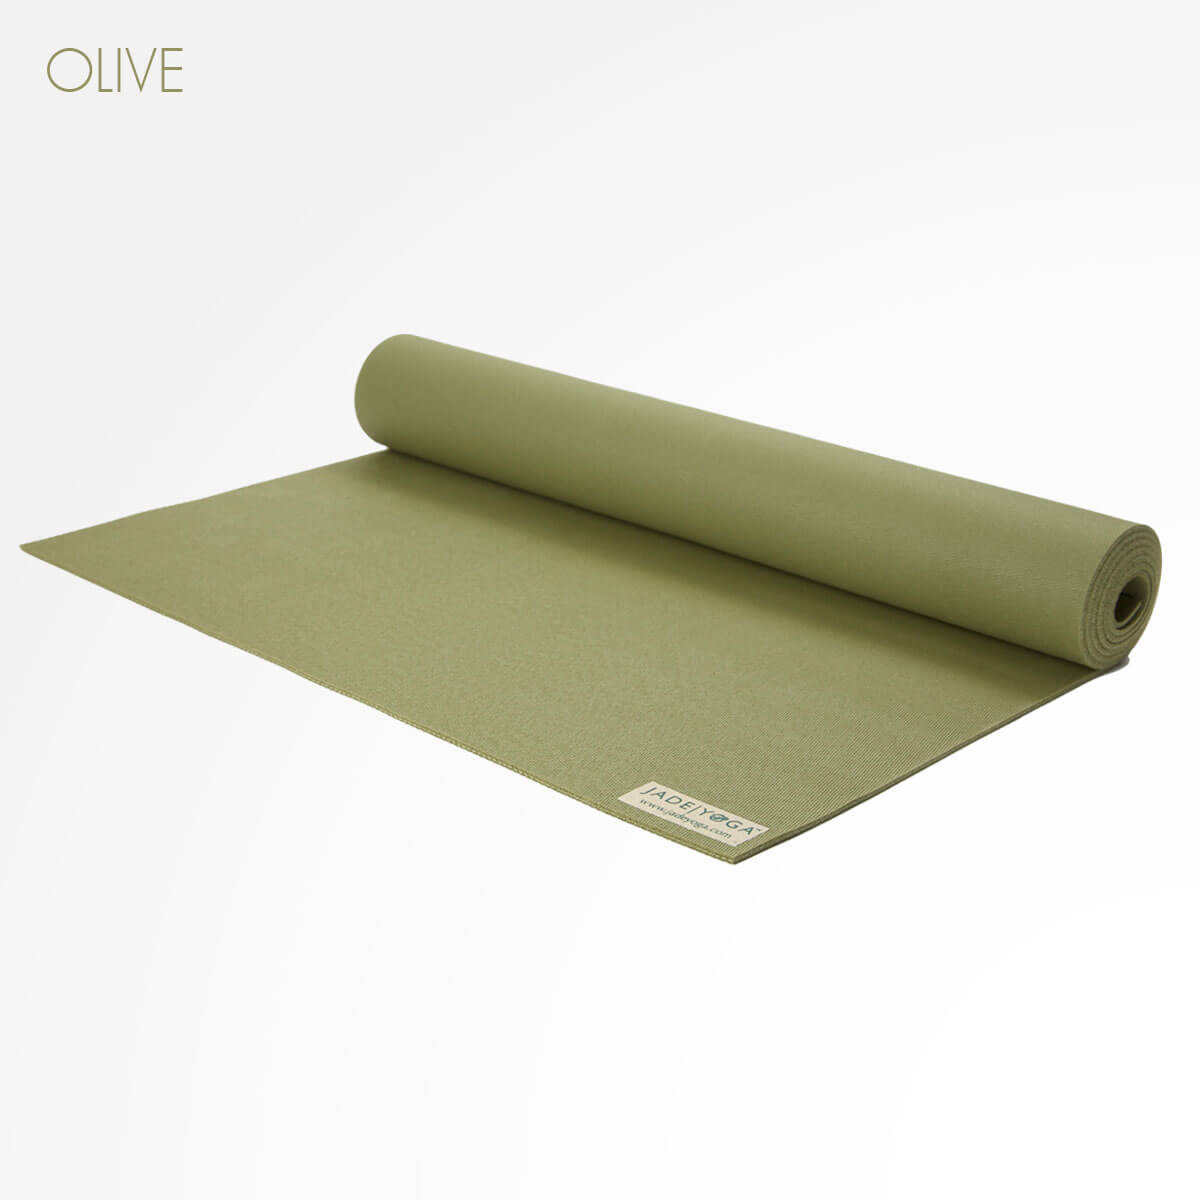 Shop Yoga Mats, They're here! Our new yoga mats are Earth-friendlier than  ever and made with the strength to support your personal practice., By  prAna